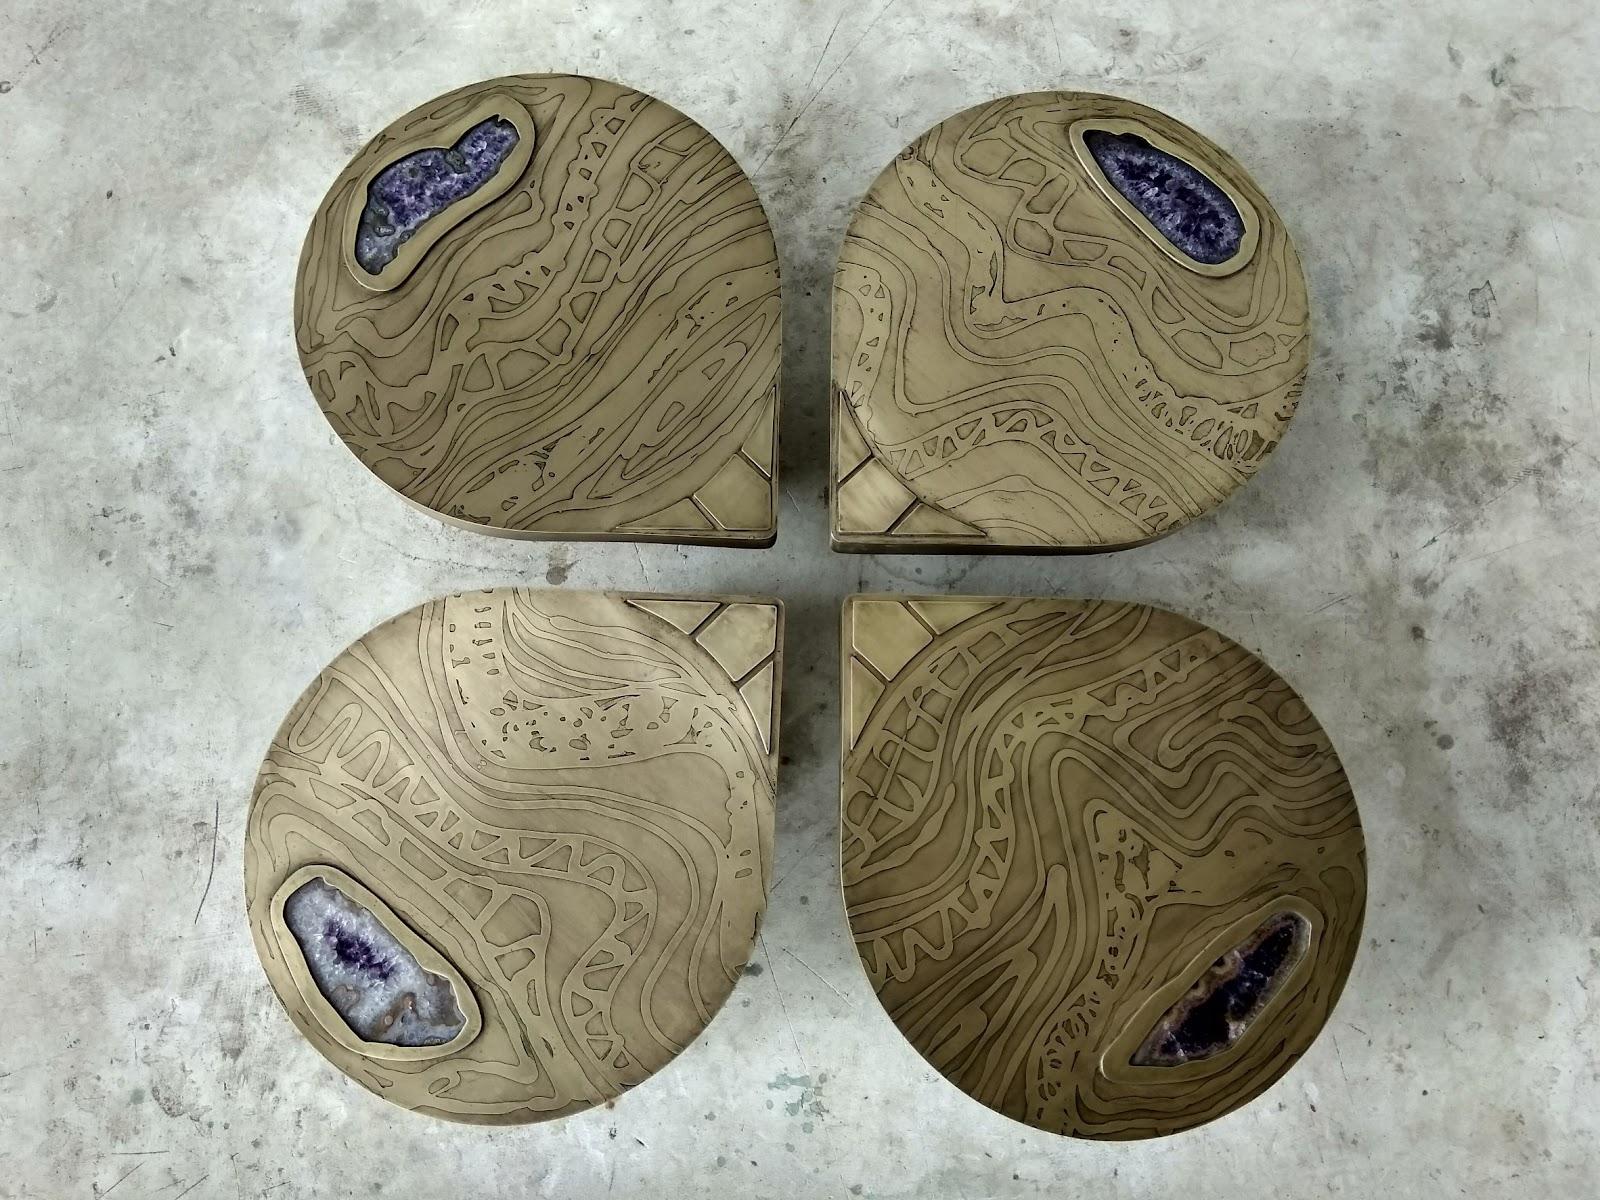 Set Of 4 Cloves Brass Coffee Tables by Brutalist Be
One Of A Kind
Dimensions: D 40 cm x W 48 x H 32 cm (each).
Materials: Brass and amethyst stone.

Also available in copper and in matte, glossy or black-patinated finishes. Please contact us.